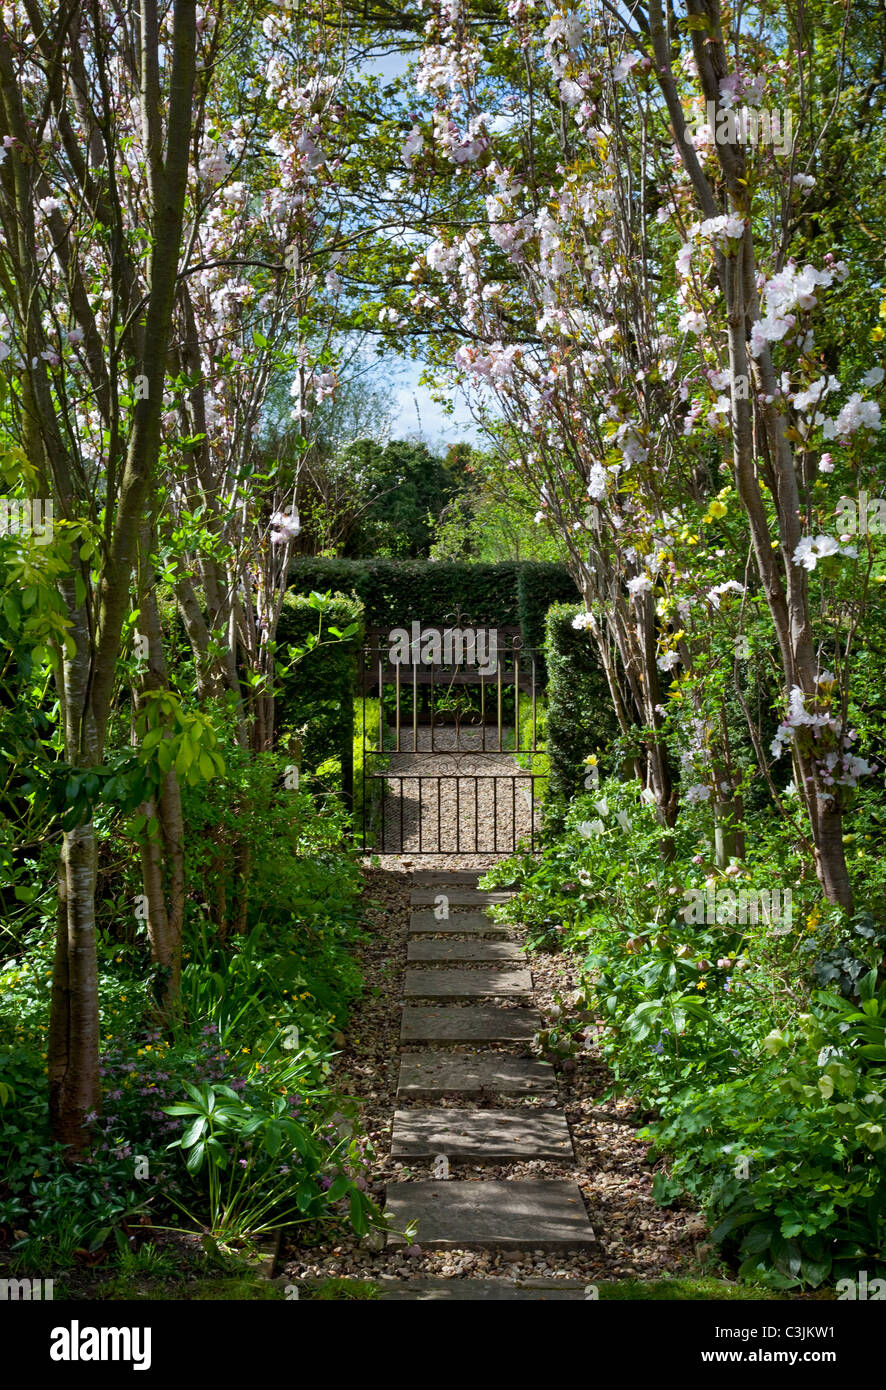 Stone slab pathway leading to metal gateway lined with cherry blossom in spring english garden Stock Photo